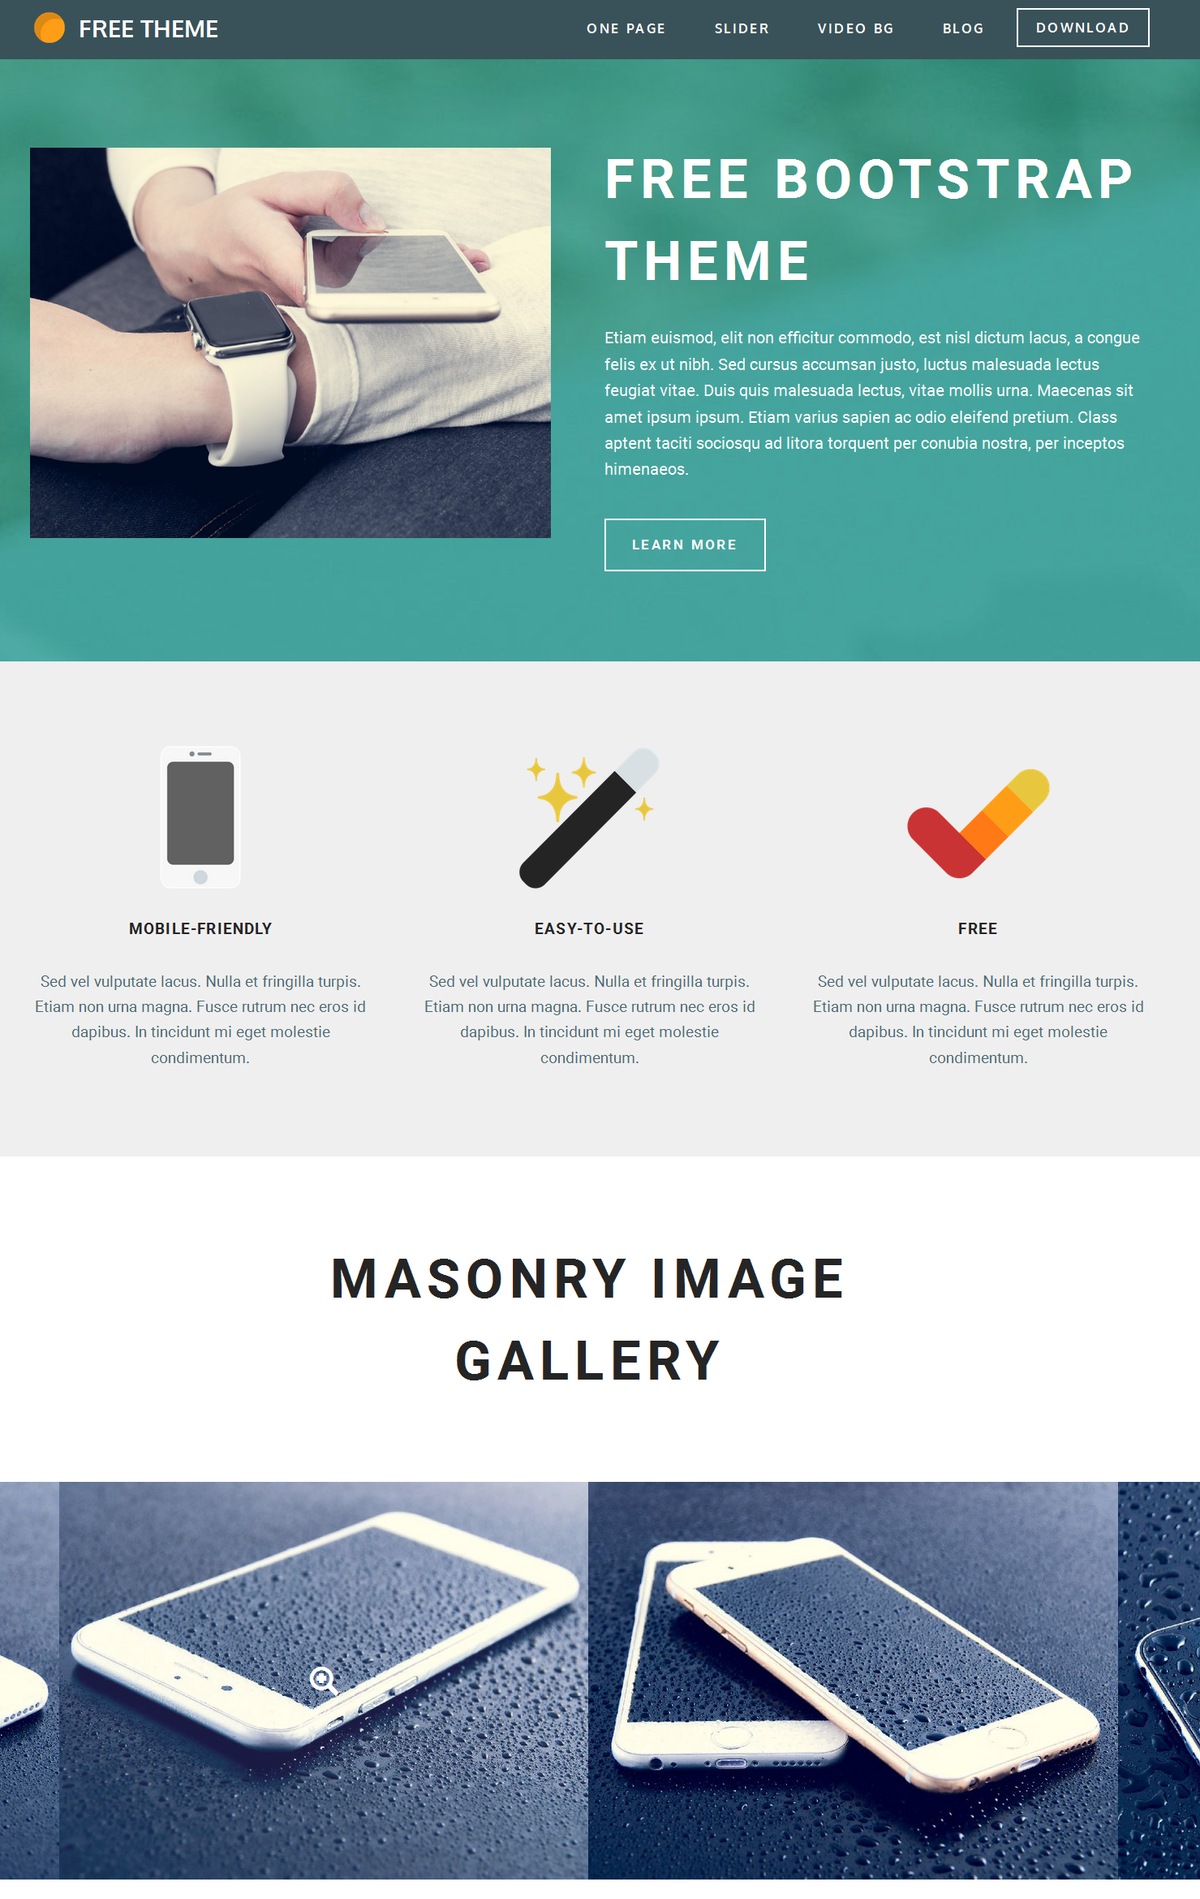 Detail Bootstrap Photo Gallery Template Free Nomer 49